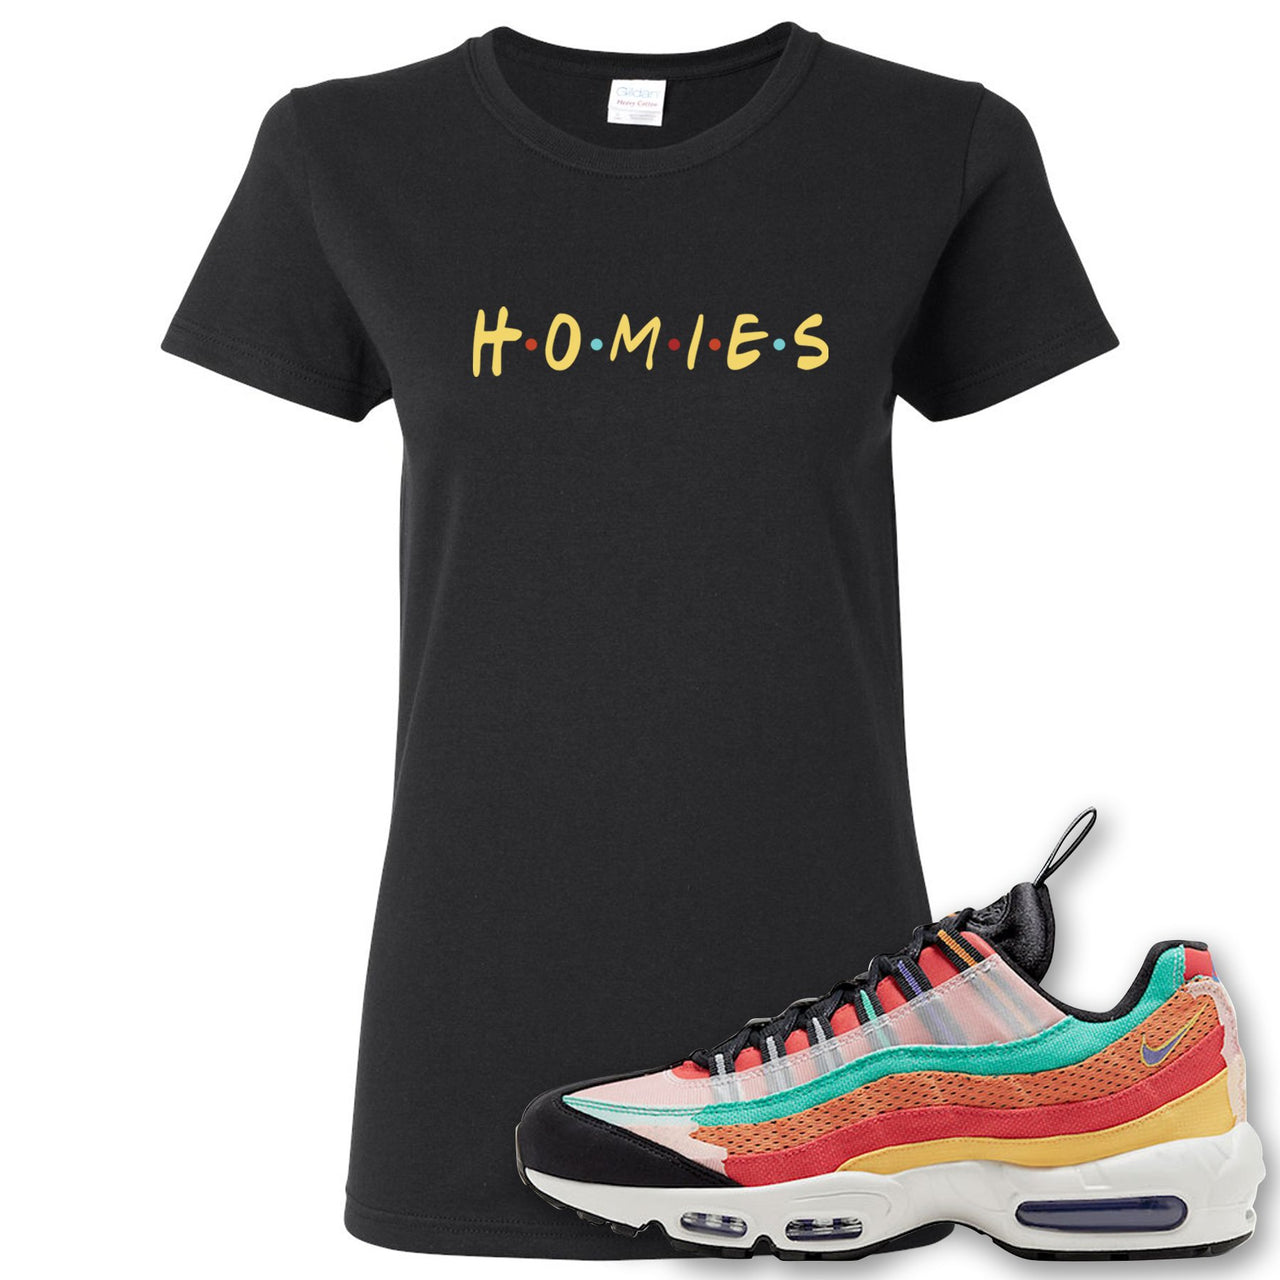 Air Max 95 Black History Month Sneaker Black Women's T Shirt | Women's Tees to match Nike Air Max 95 Black History Month Shoes | Homies